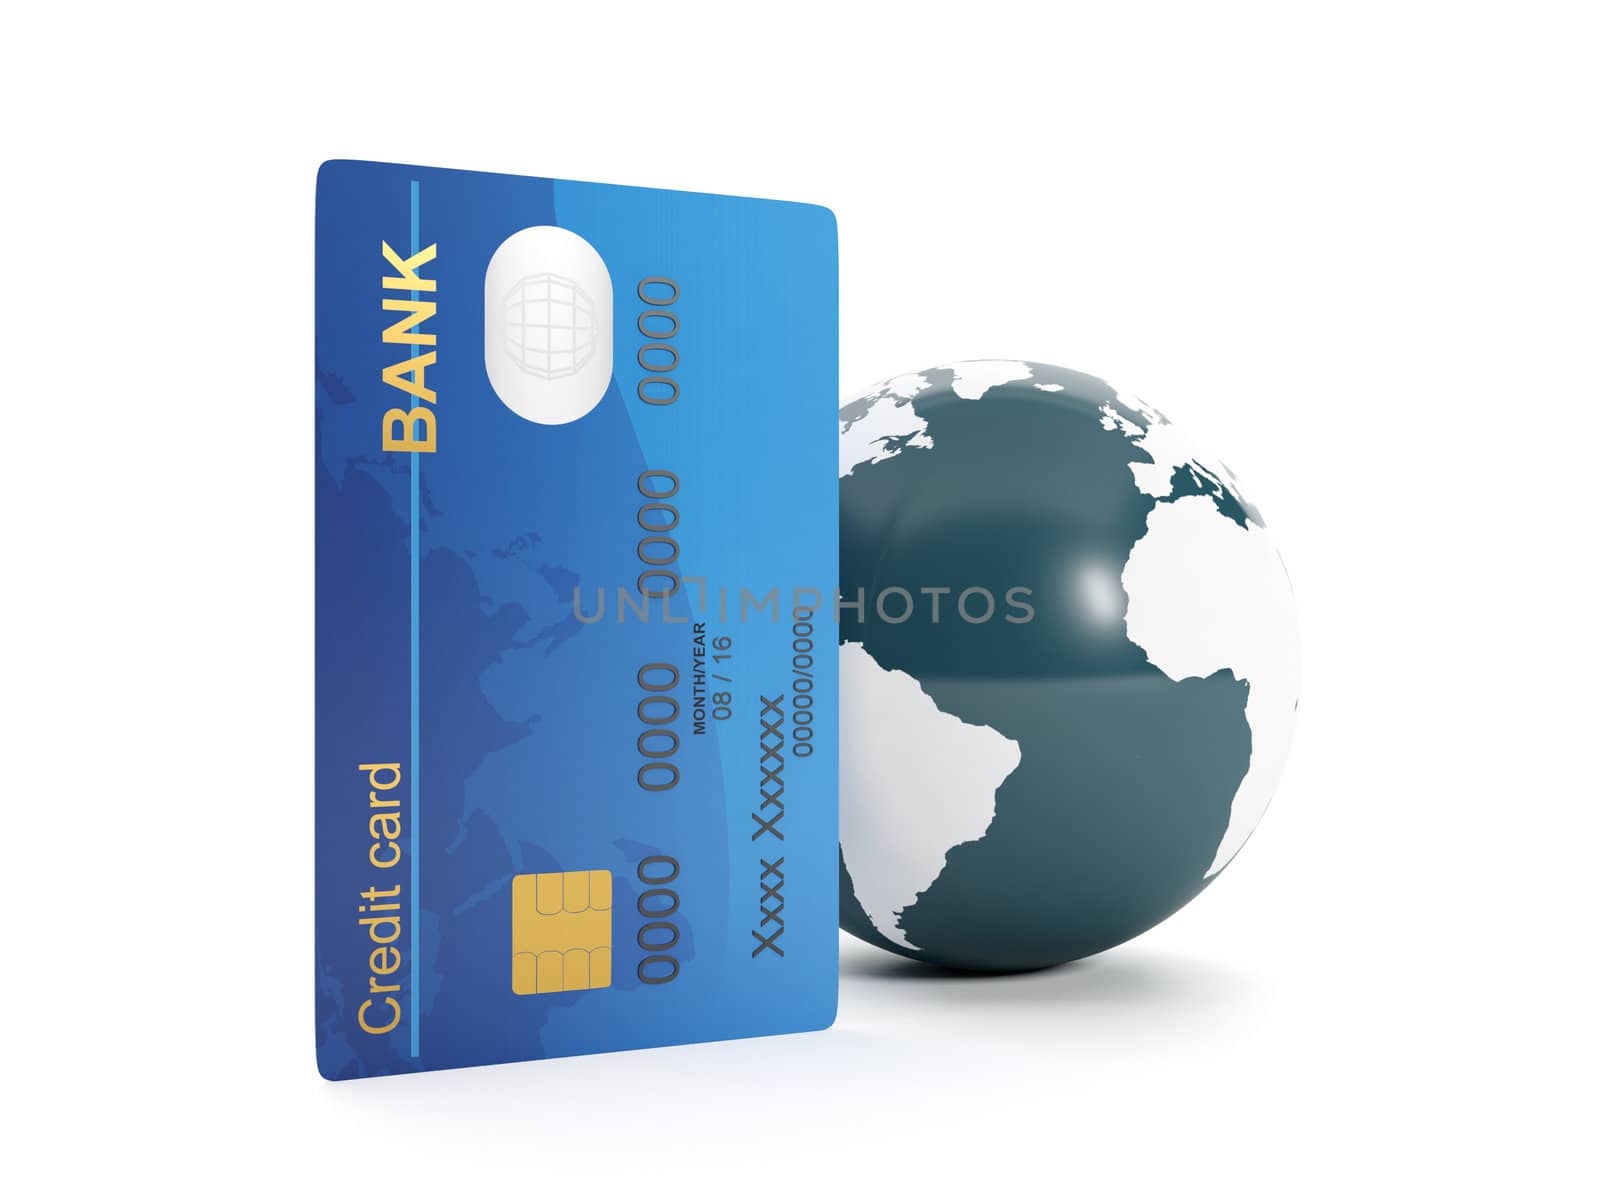 3d illustration: Using a credit card anywhere in the land by kolobsek